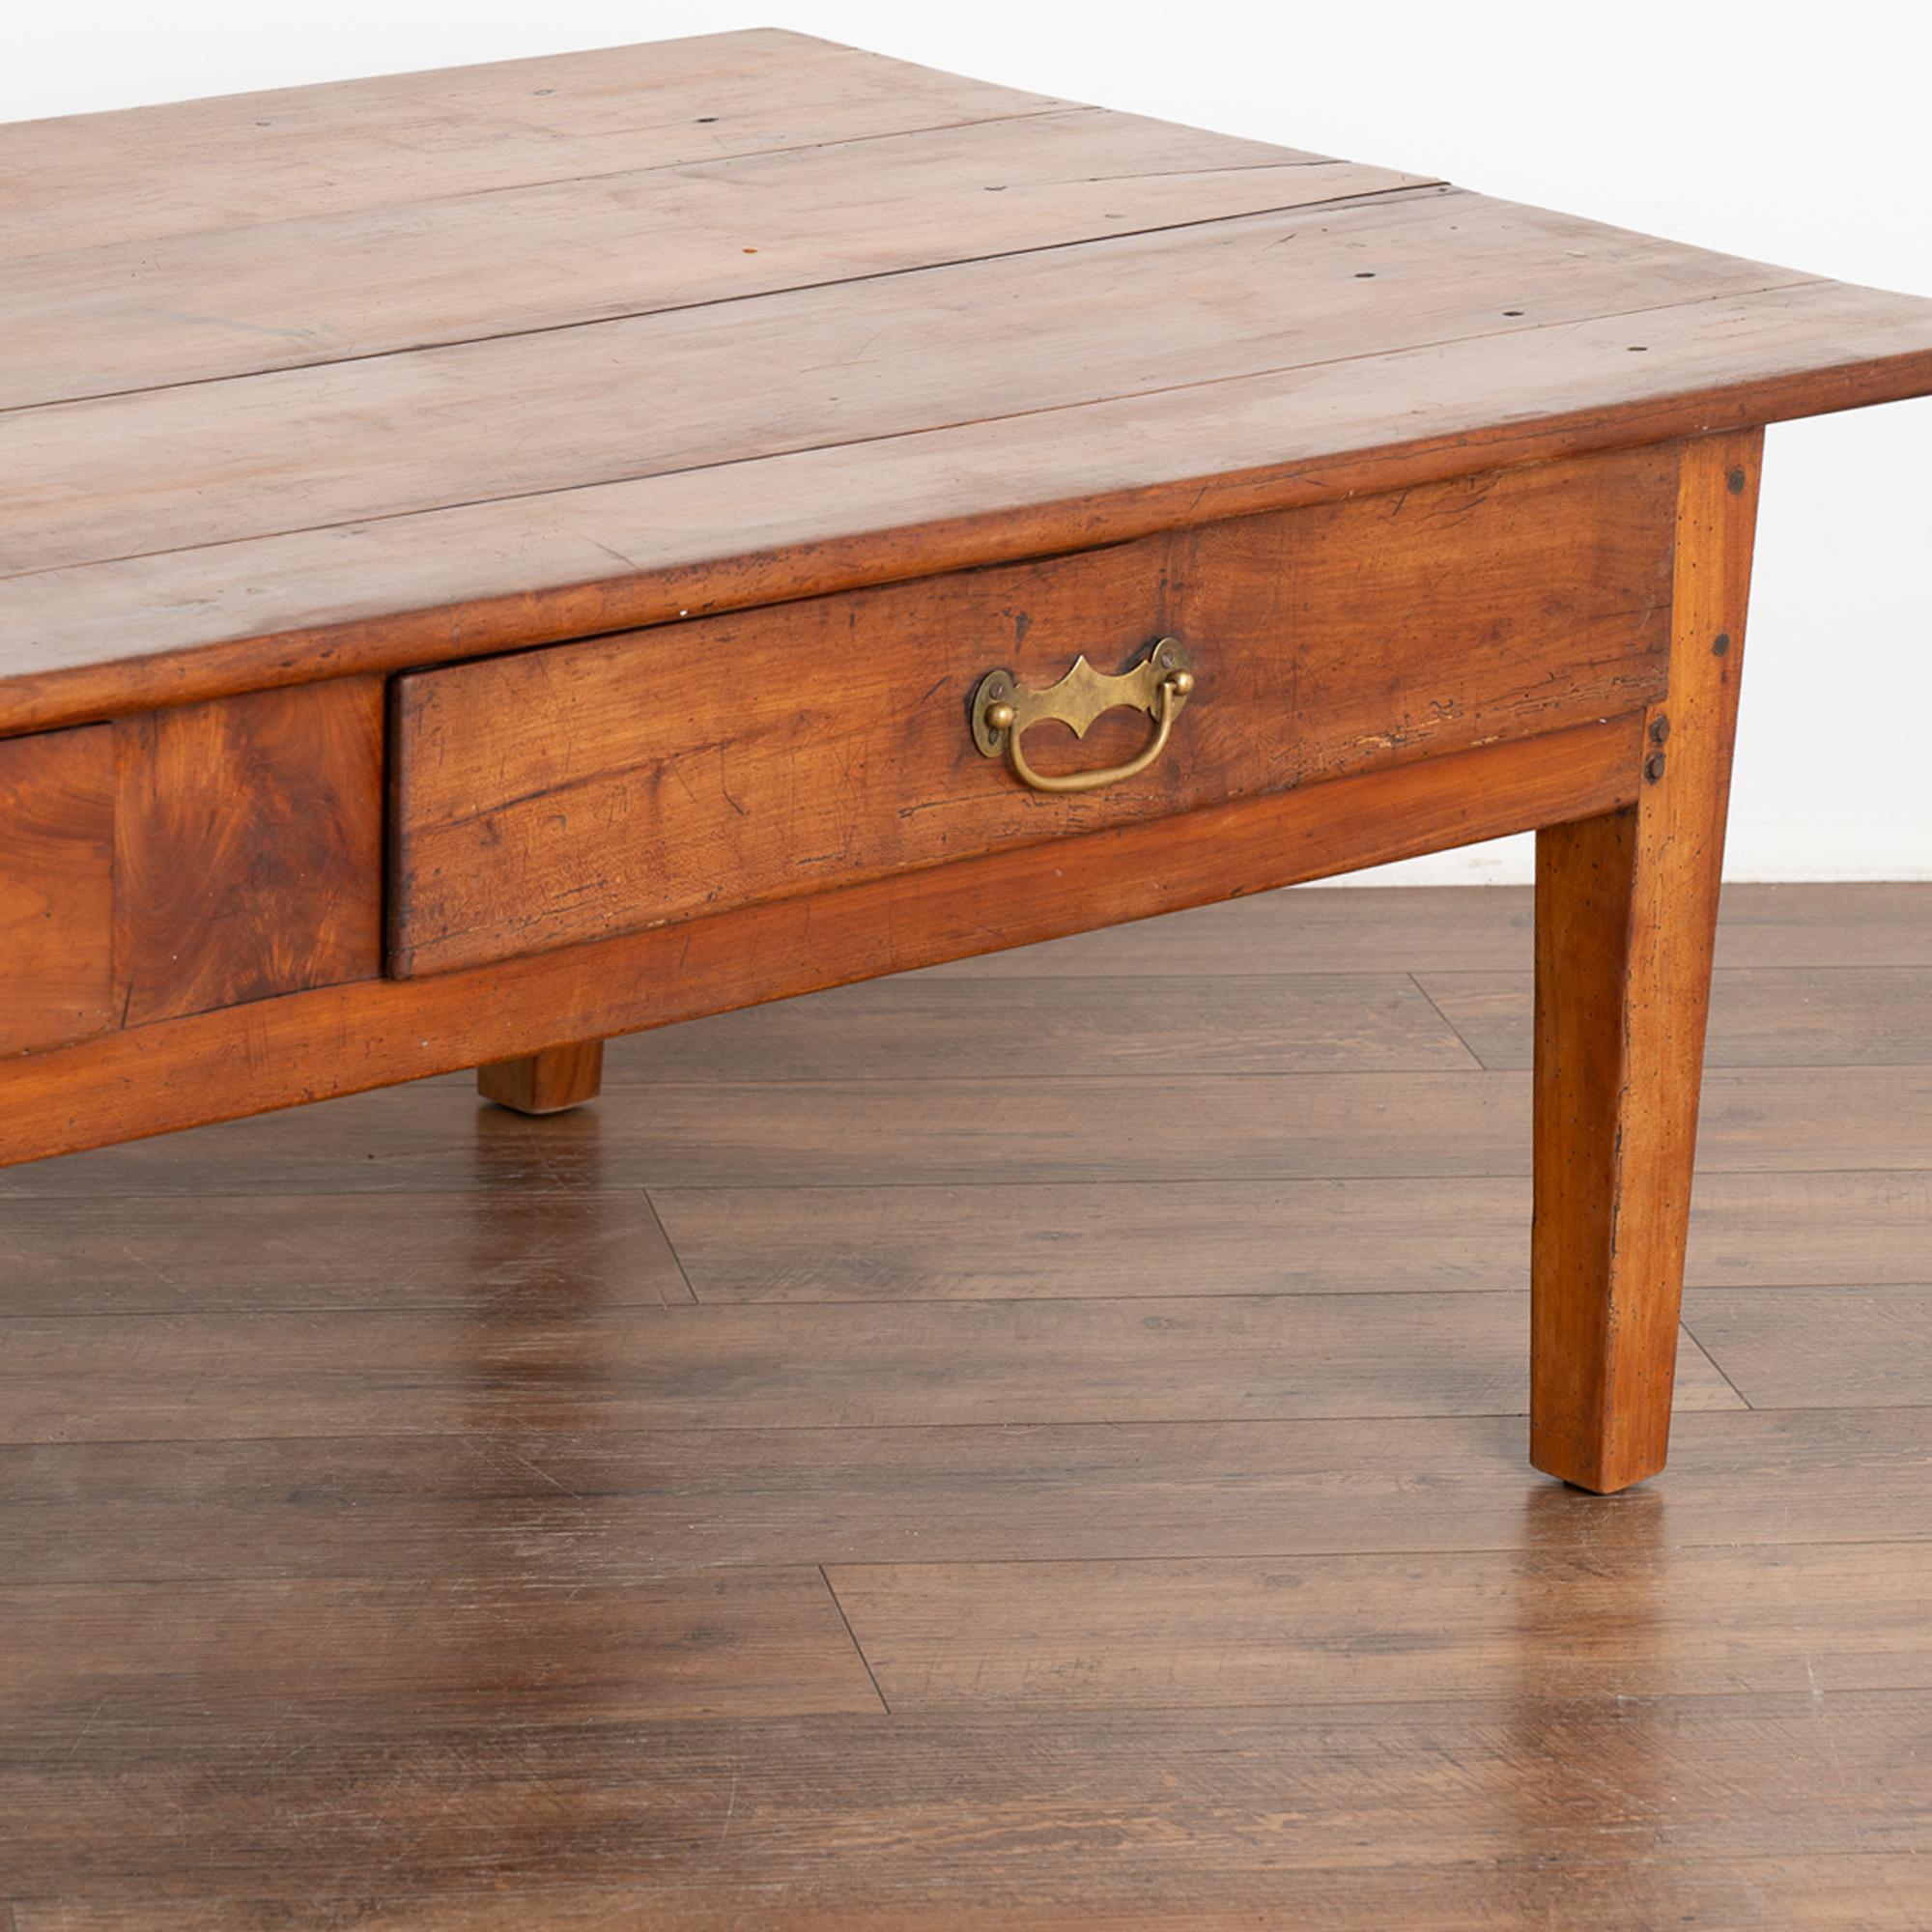 Large French Country Cherry Wood Coffee Table, circa 1820-40 3